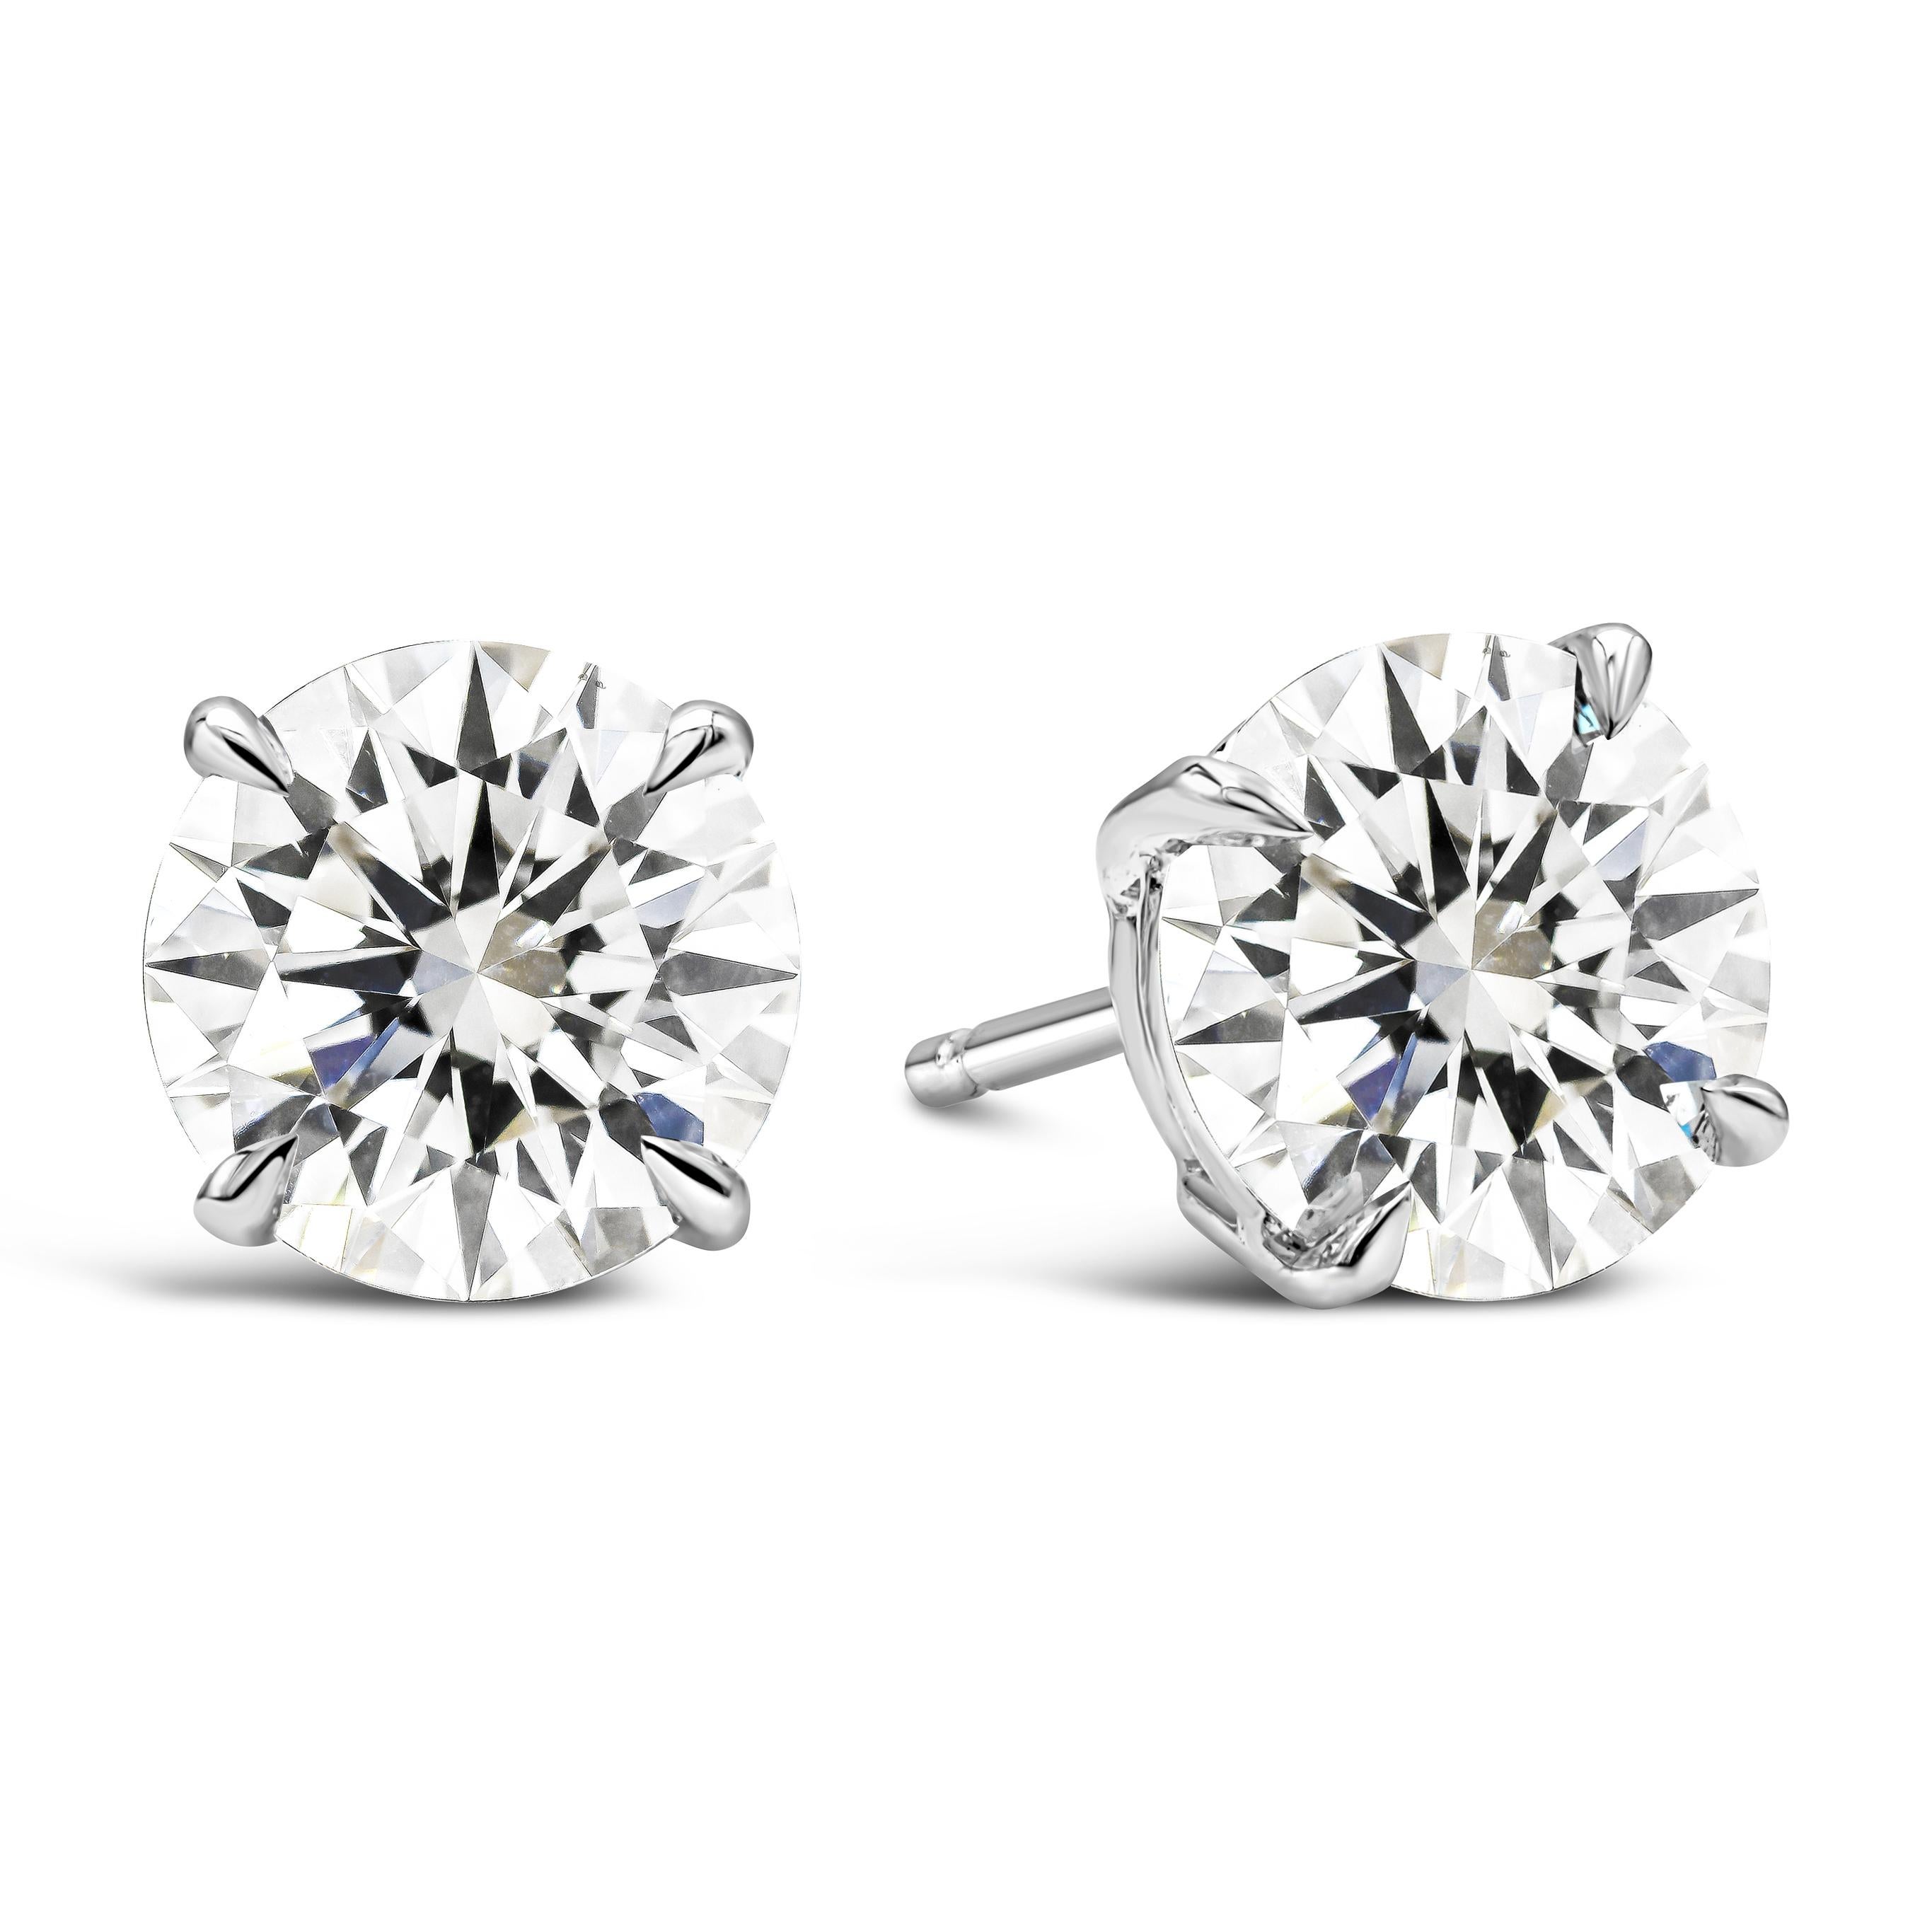 A timeless stud earring design to compliment any style. Showcasing 2 round brilliant diamonds weighing 1.17 carats, H Color and I1 in Clarity. Made with 14K White Gold

Style available in different price ranges. Prices are based on your selection.